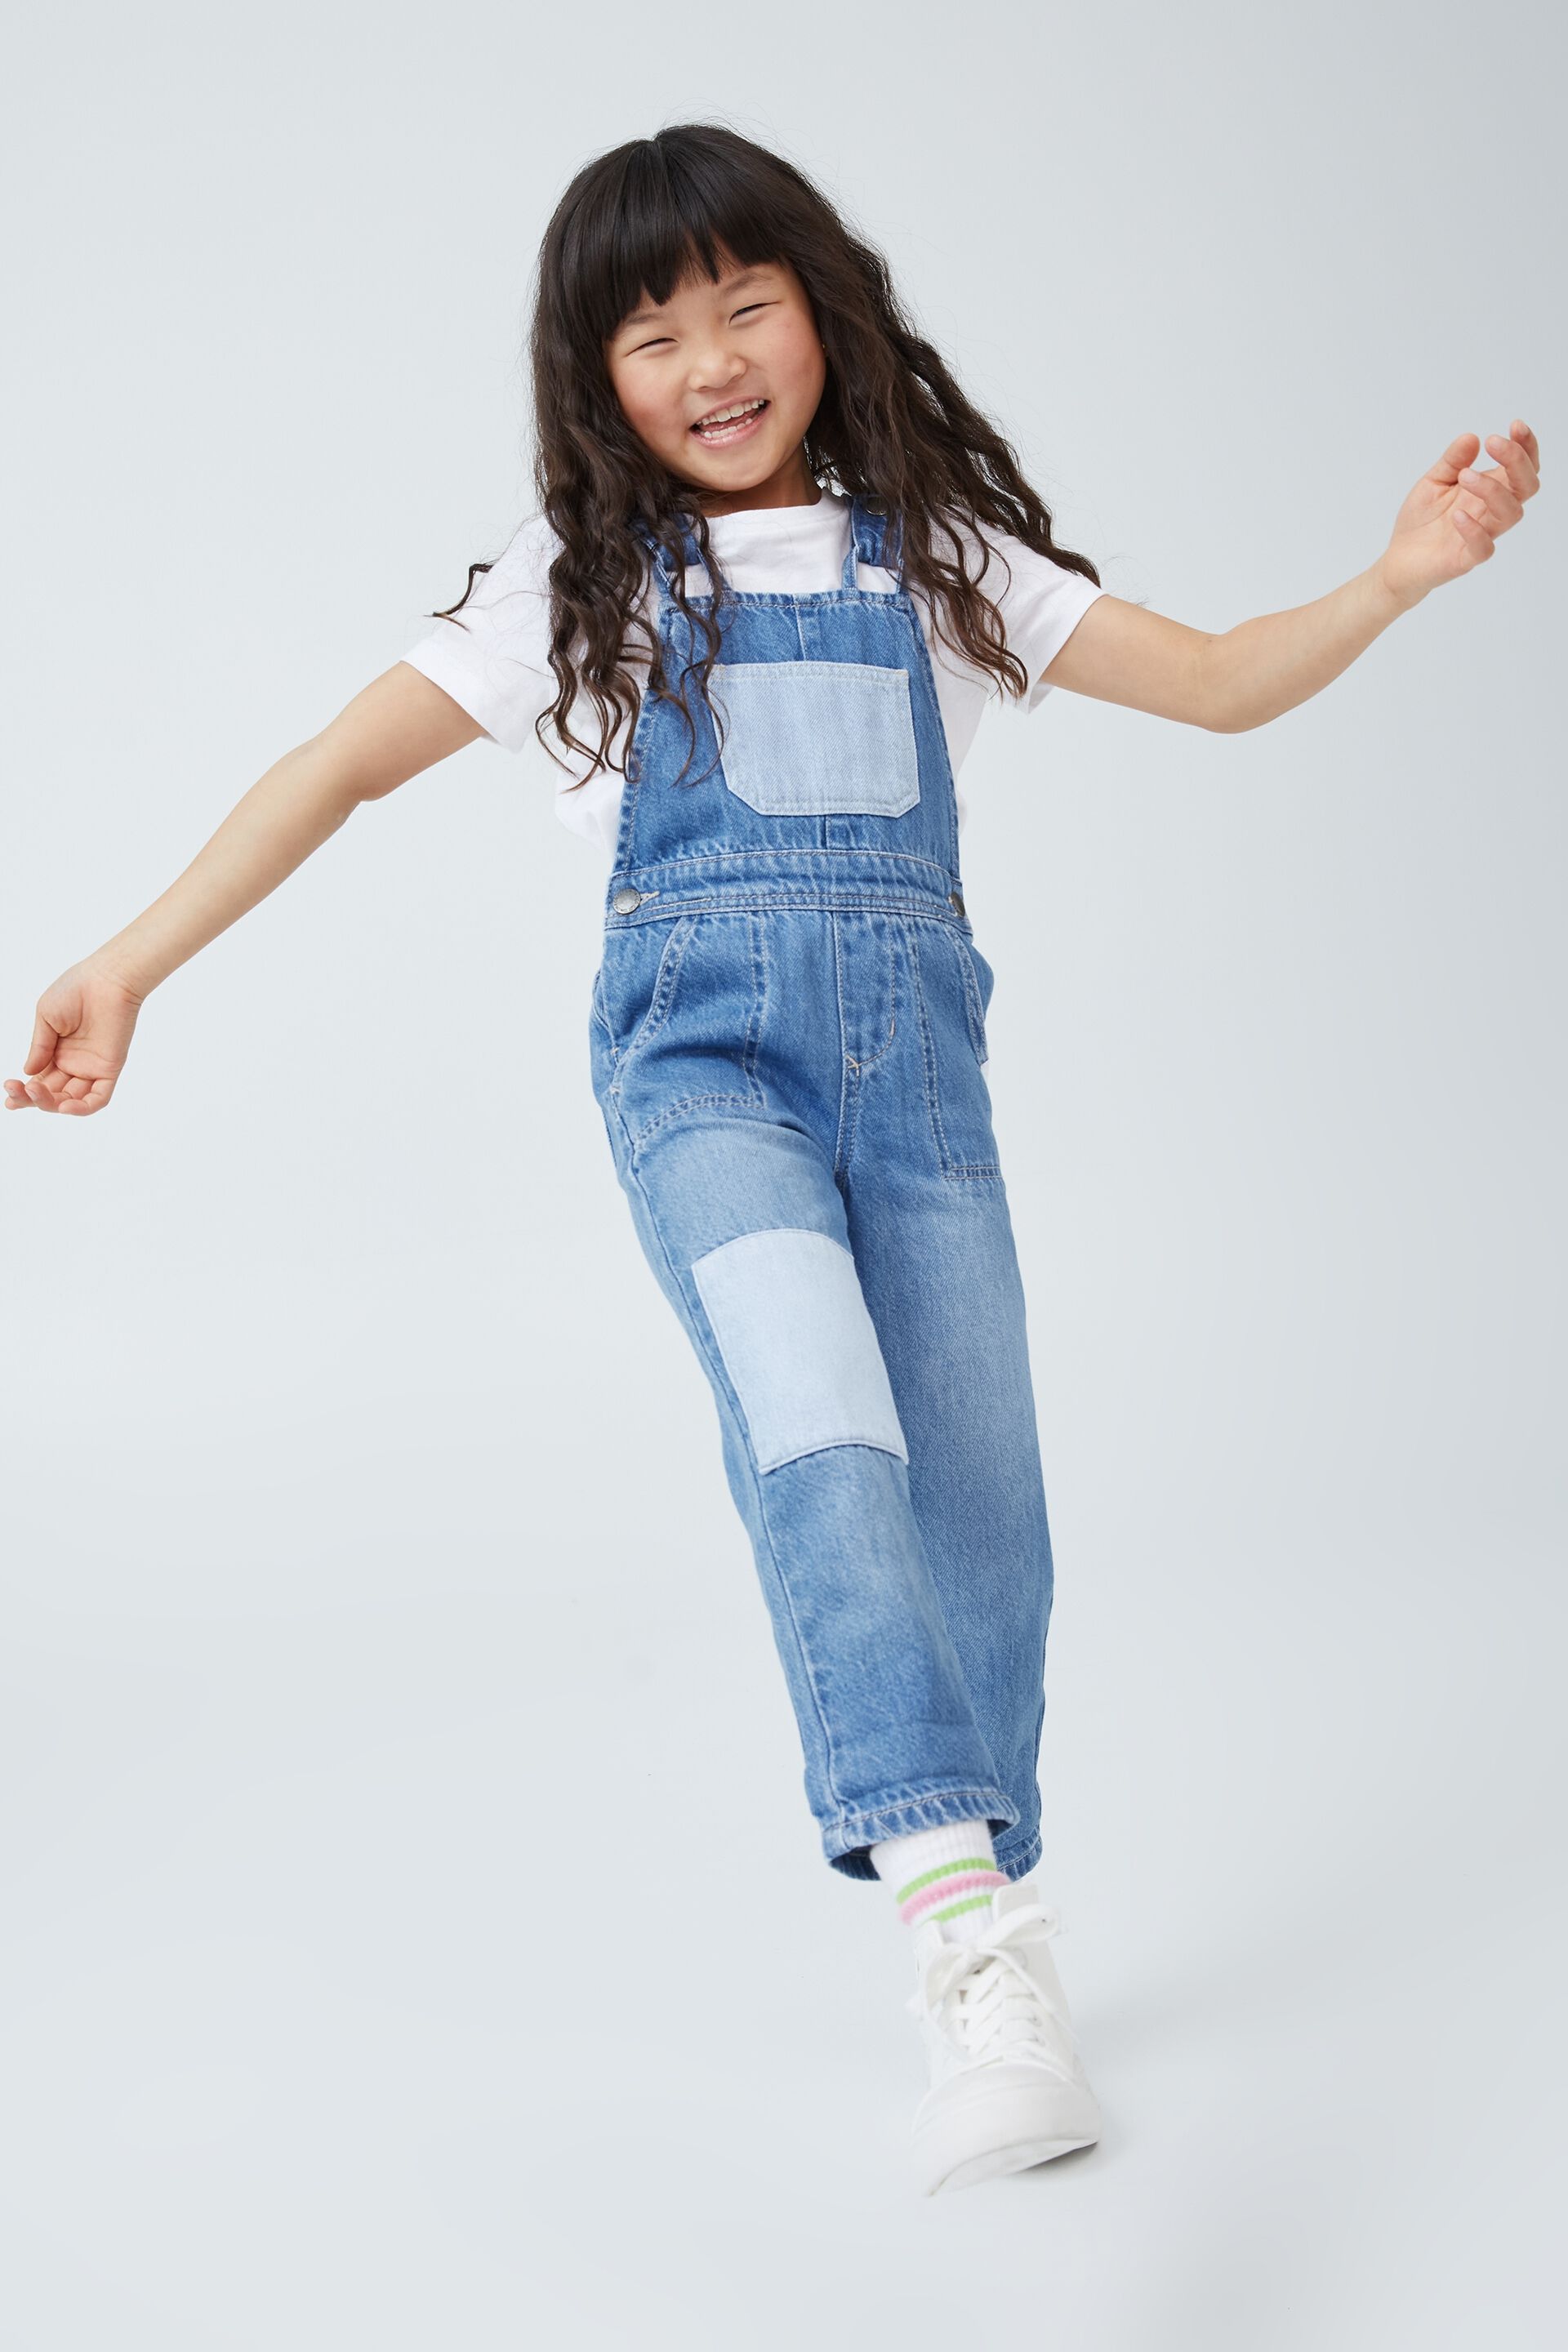 Tiffosi dungaree Blue M discount 65% WOMEN FASHION Baby Jumpsuits & Dungarees Jean Dungaree 